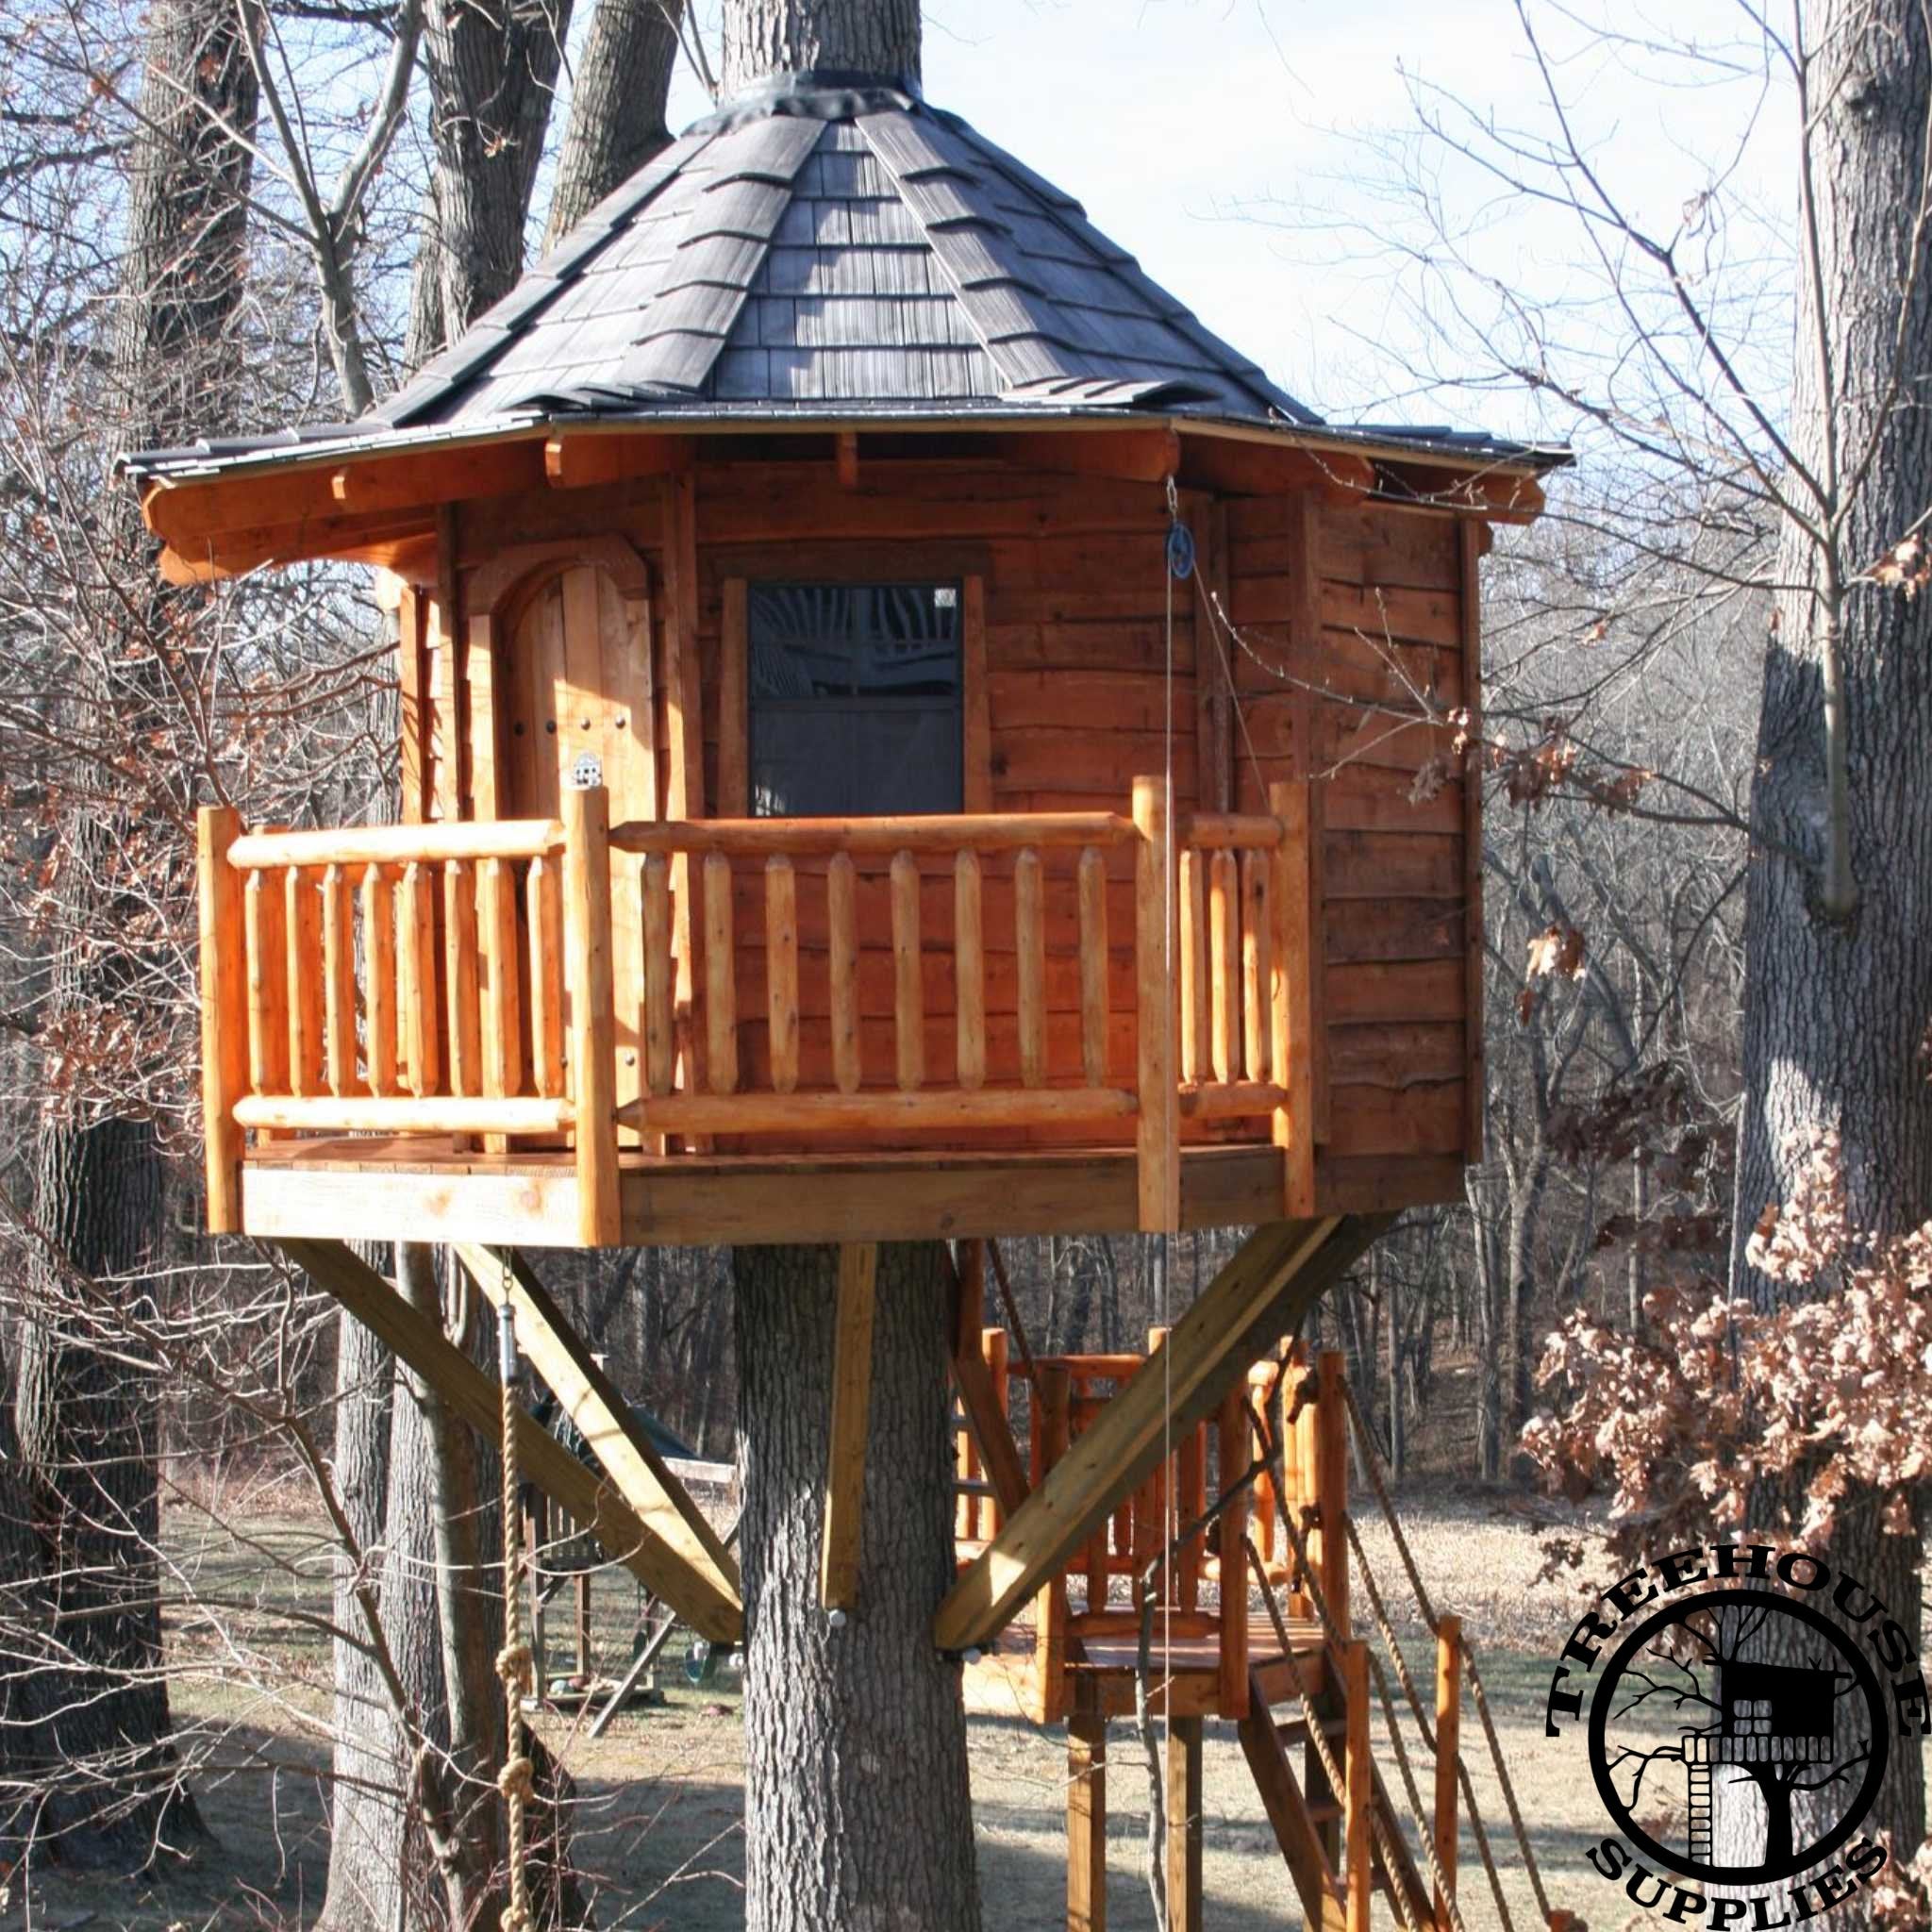 12' DIAMETER OCTAGONAL TREEHOUSE PLAN - NOW INCLUDES STEP-BY-STEP 3D MODELING!! - Treehouse Supplies